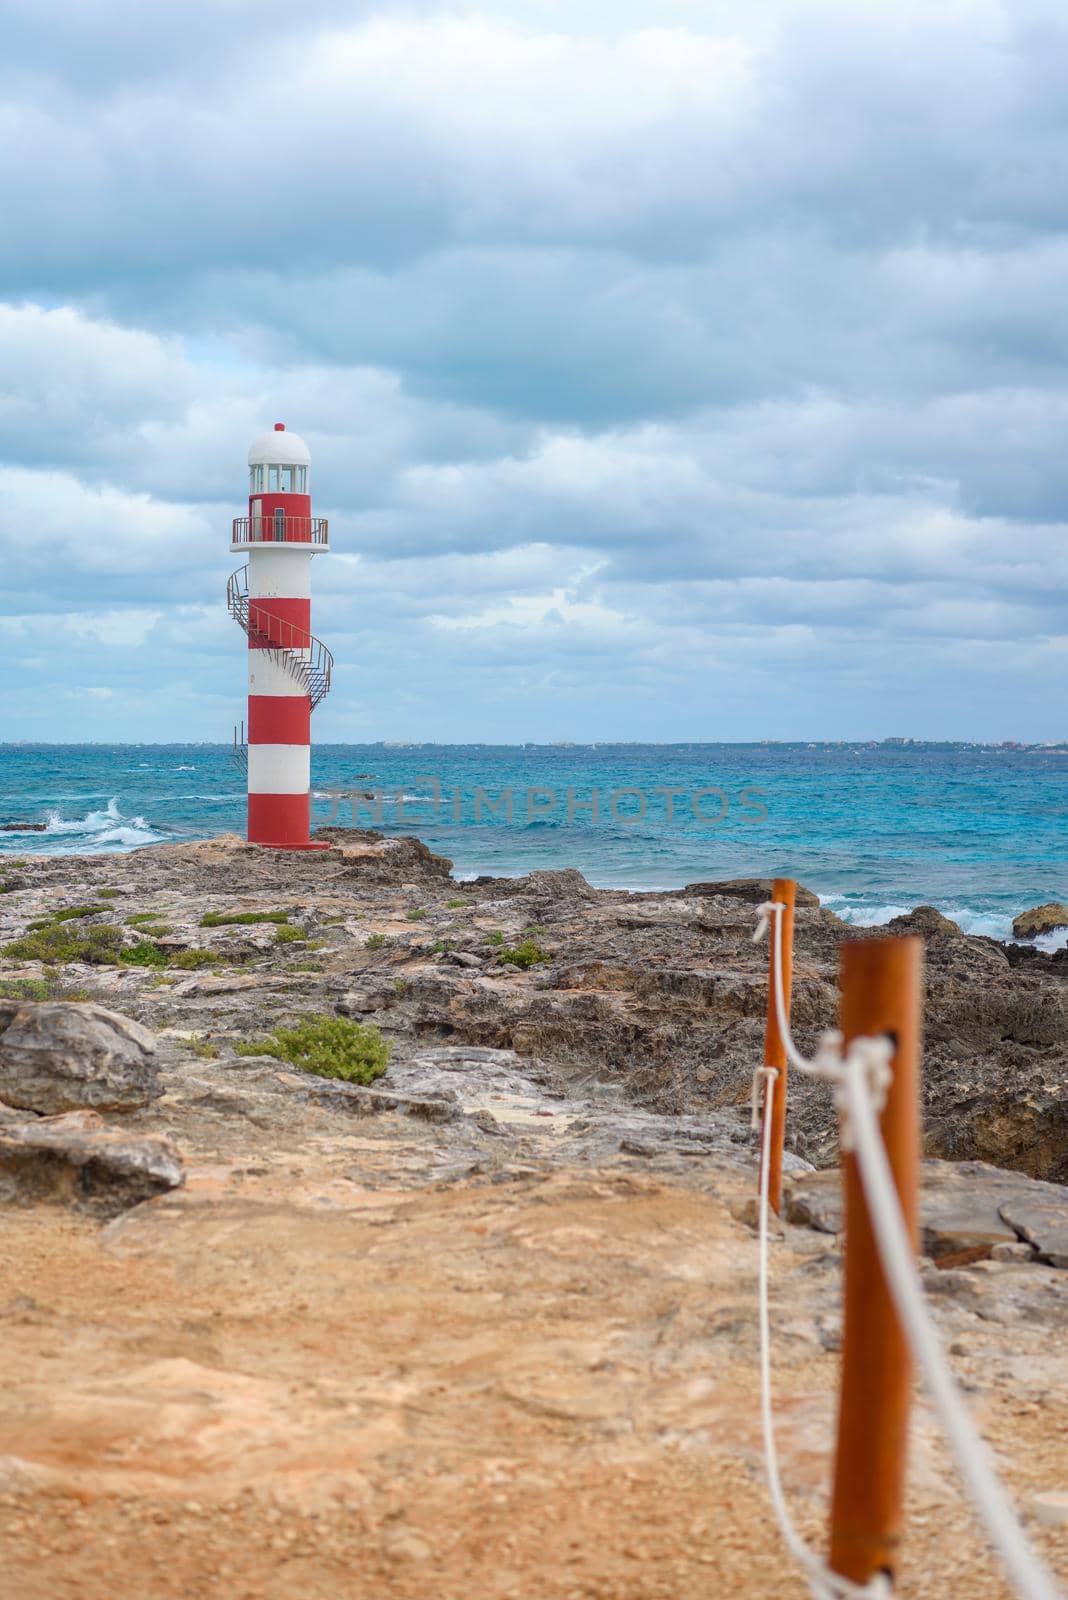 Lighthouse on a rocky shore in Cancun. Clear sky and blue sea.